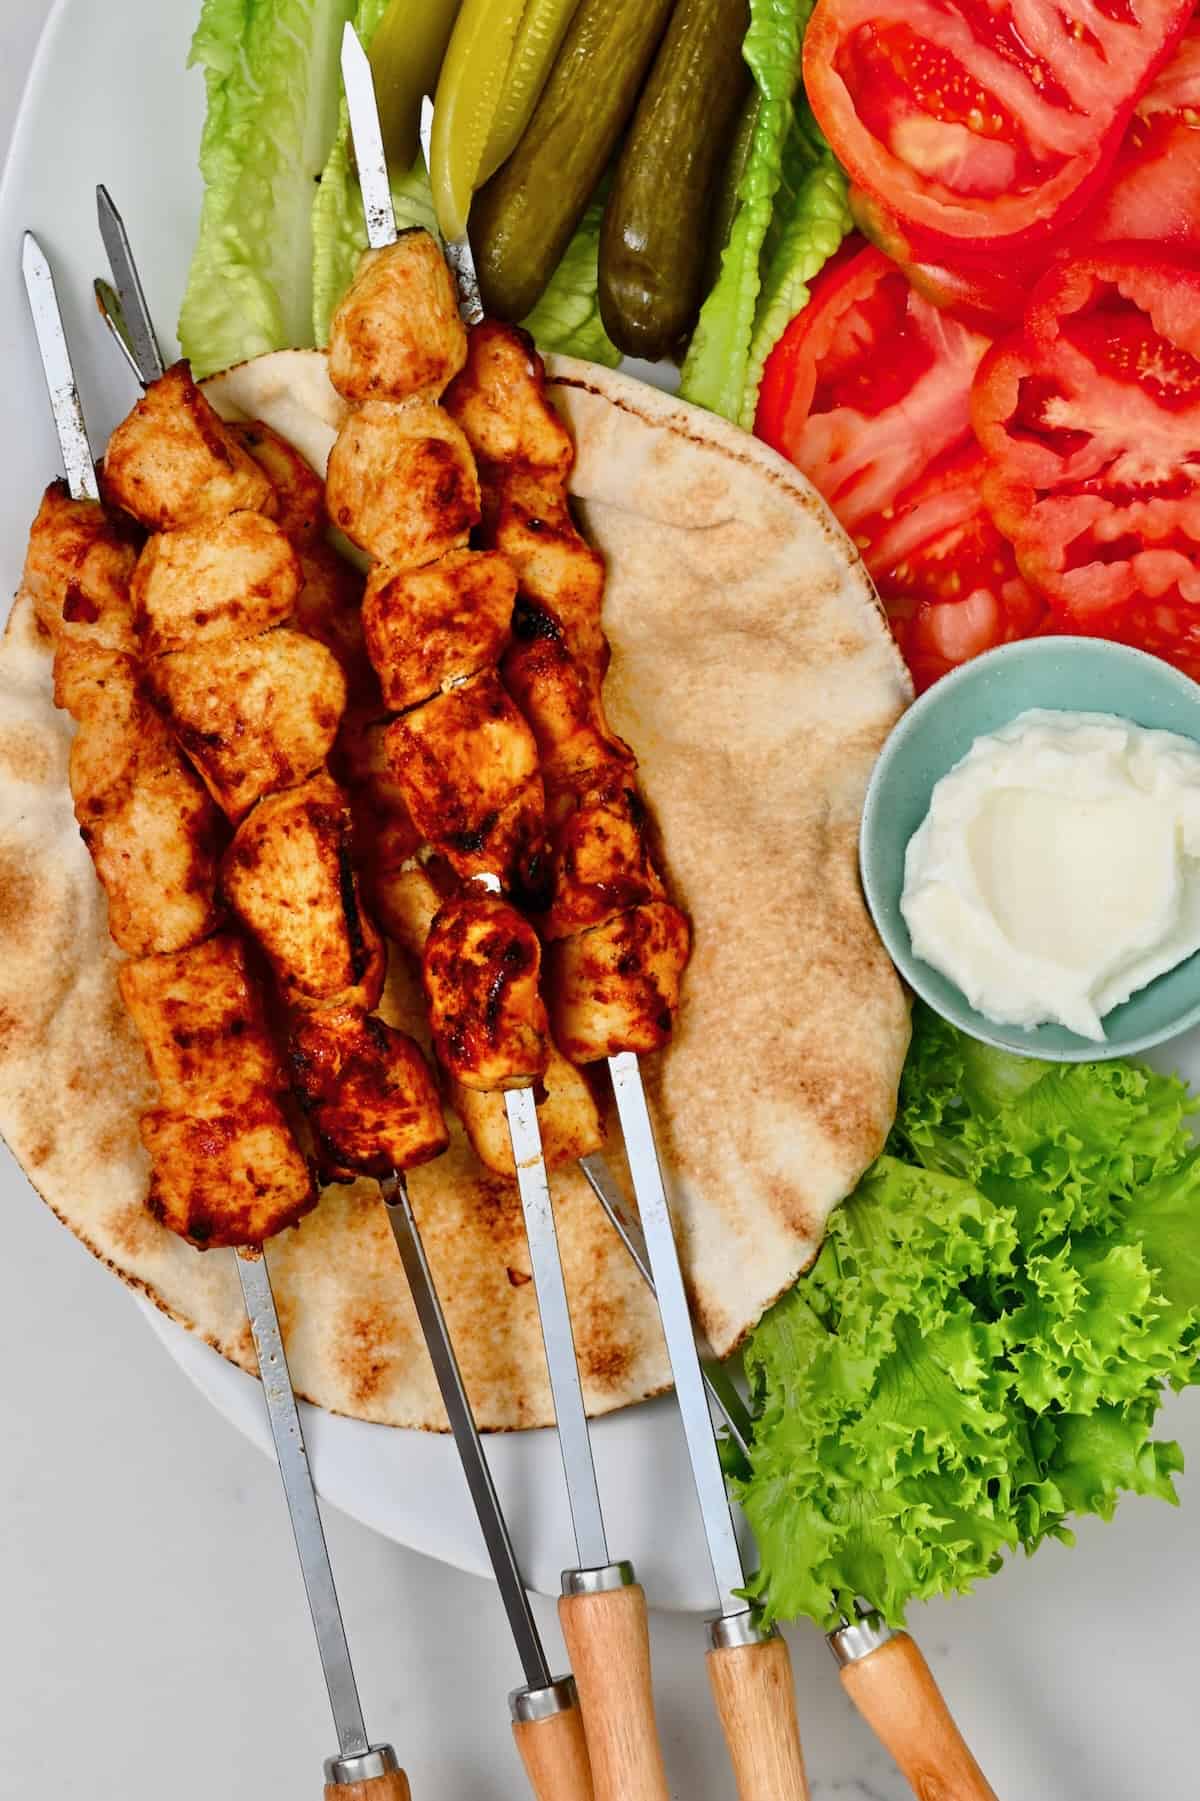 Homemade chicken shish tawook served alongside tomatoes, tour and lettuce